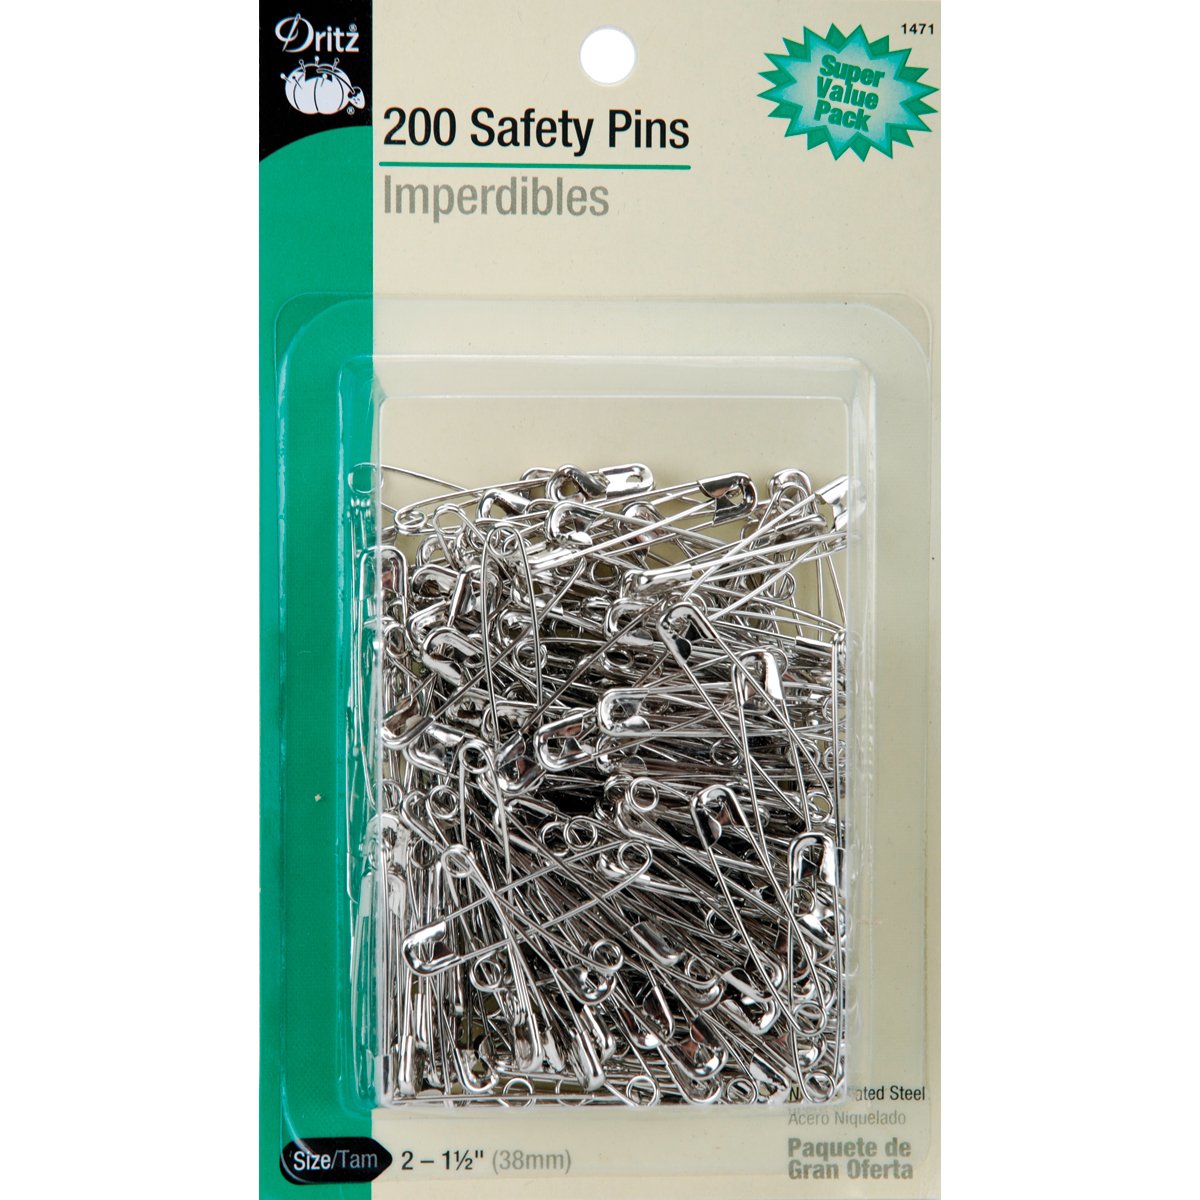 Dritz Safety Pins Size 2 Nickel 200pc - image 2 of 2